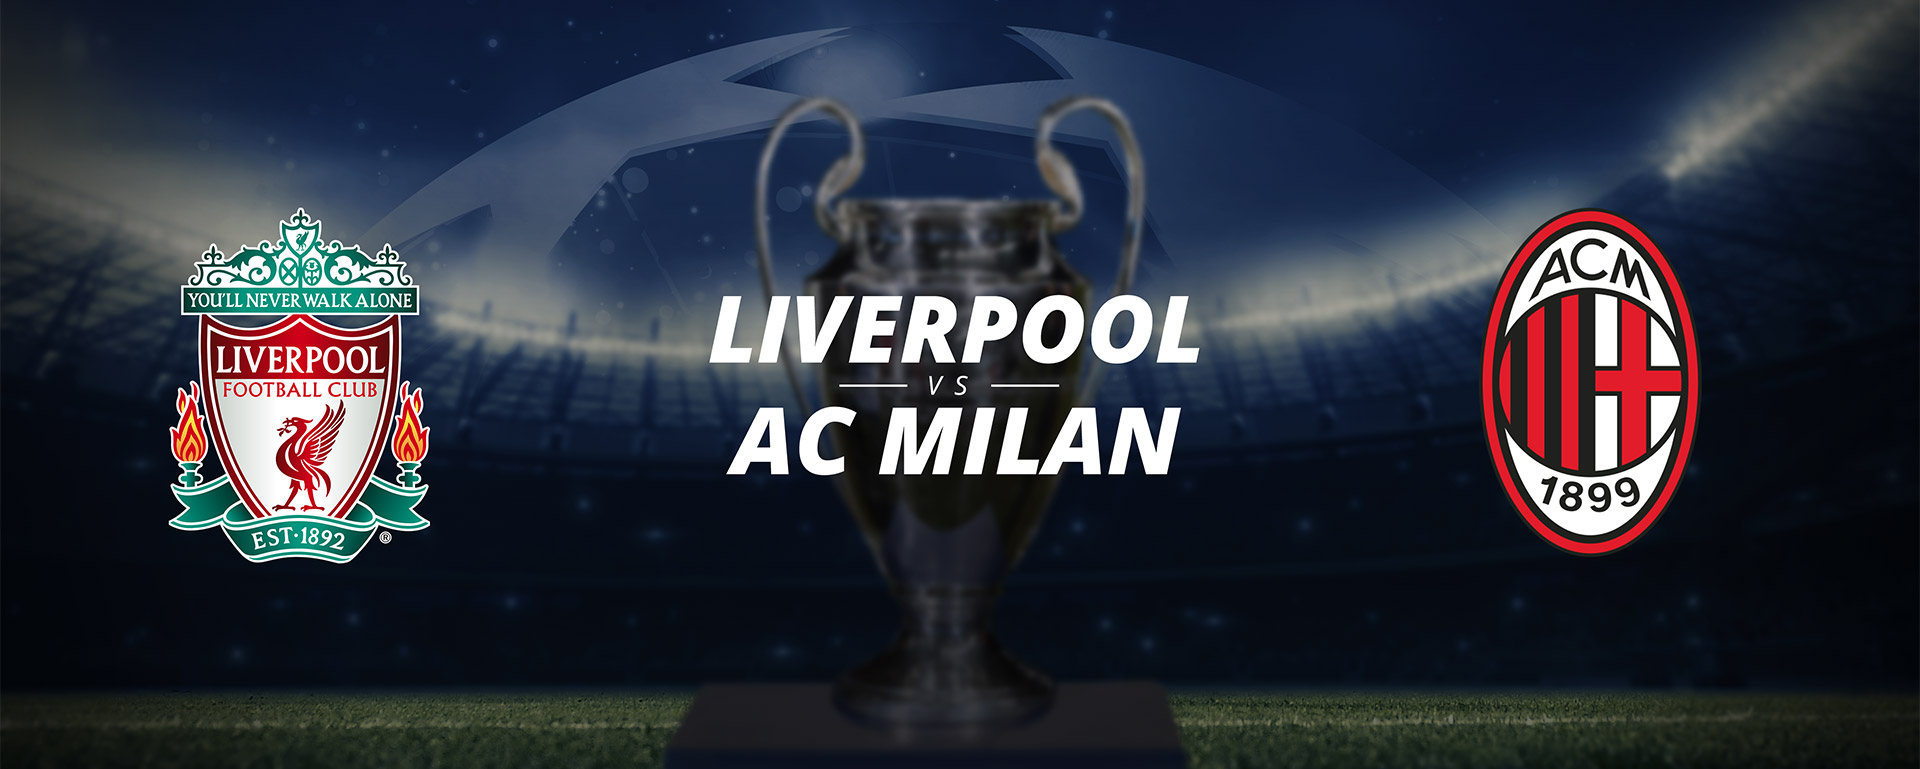 LIVERPOOL VS AC MILAN: BETTING PREVIEW